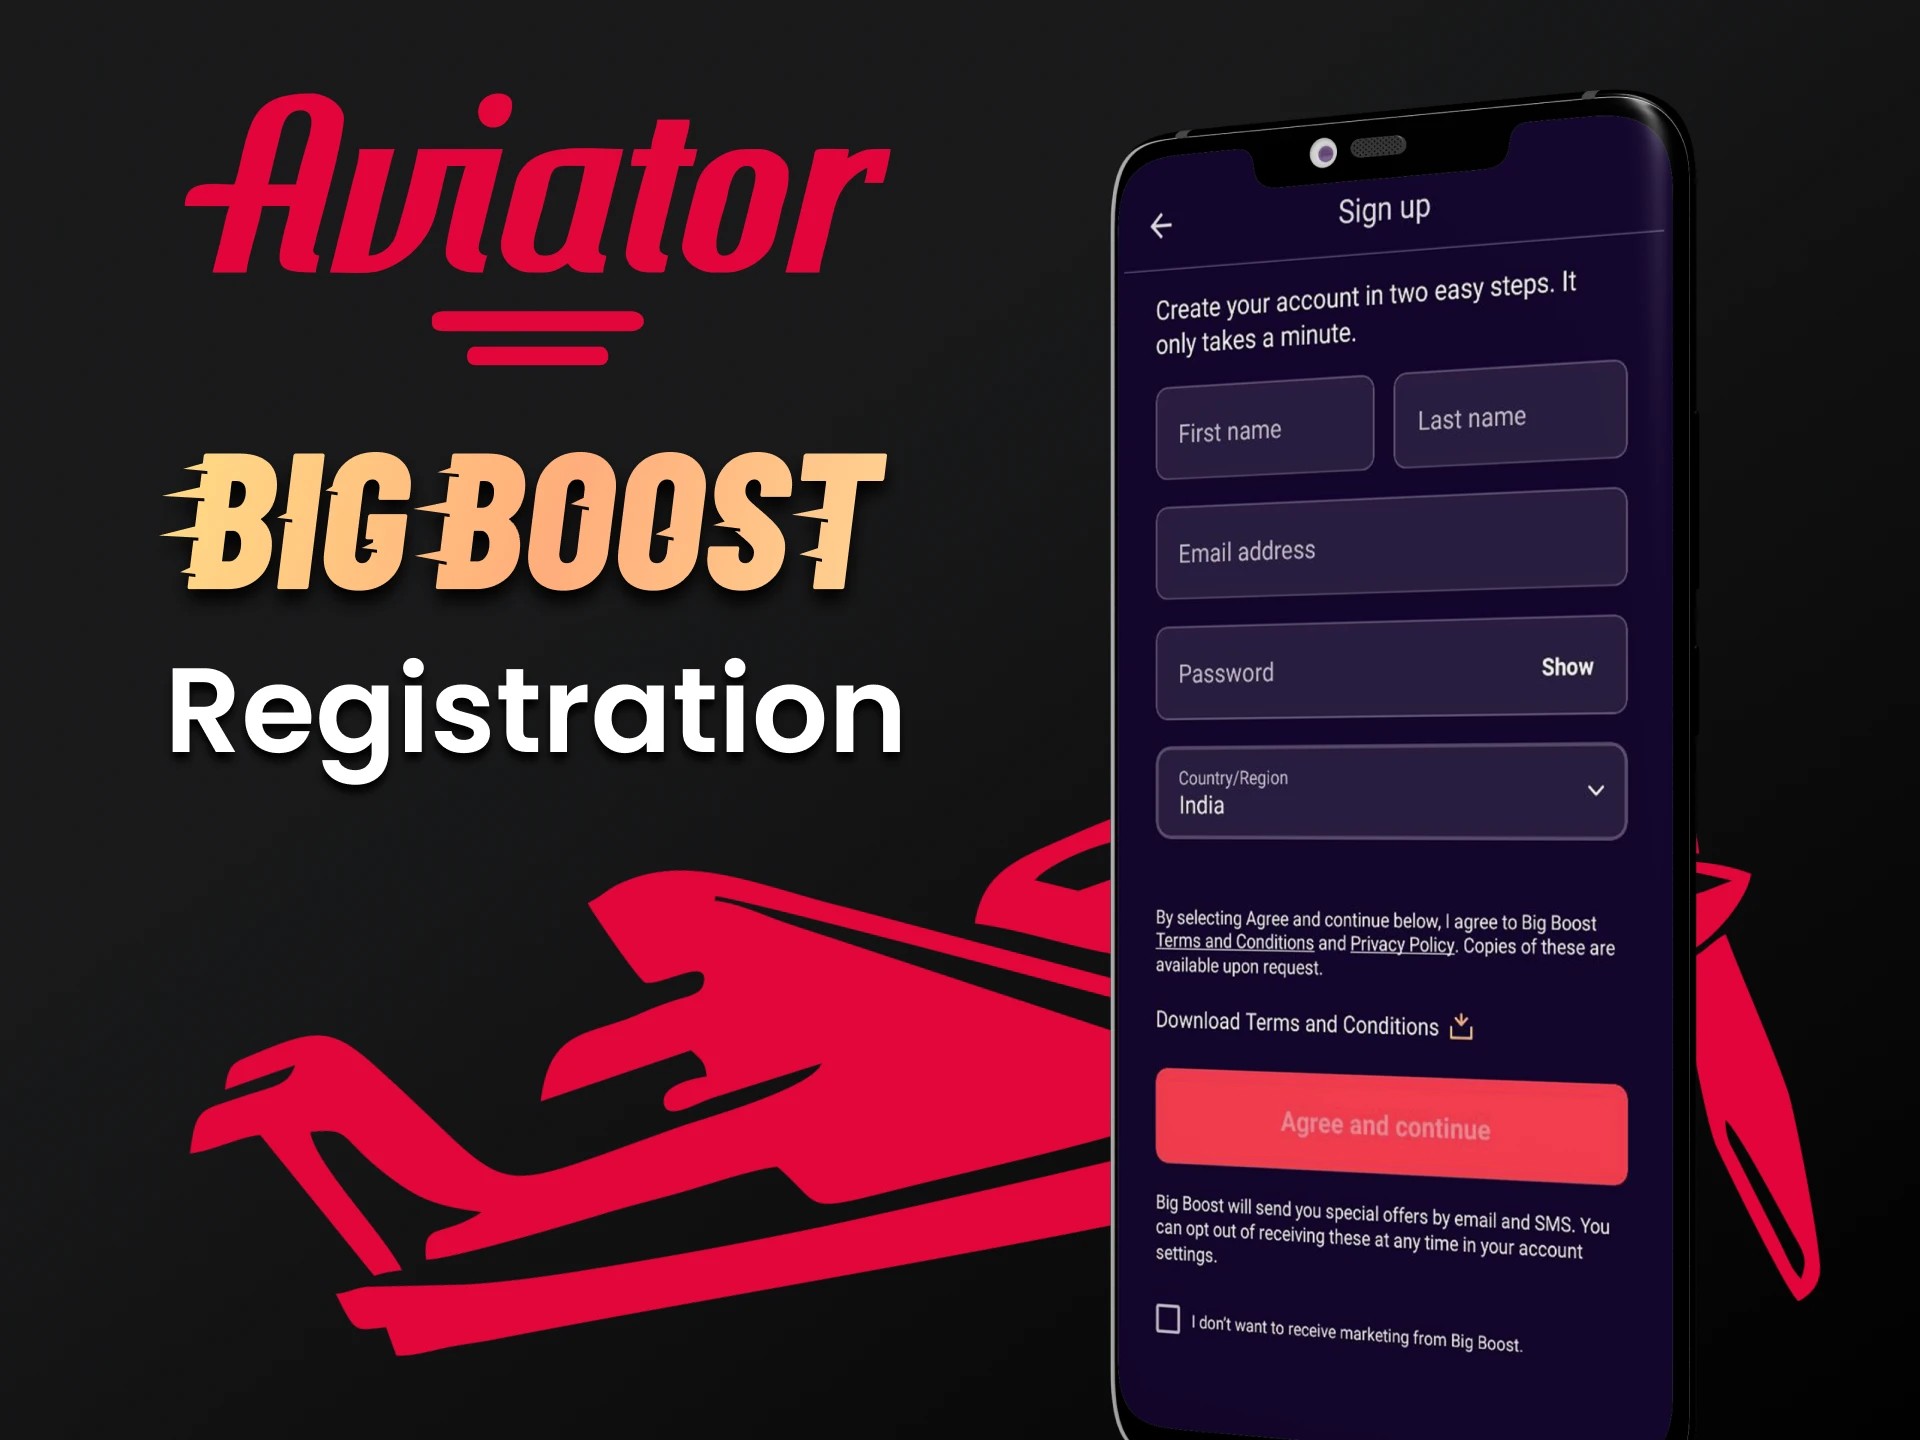 You can register in the Big Boost application.